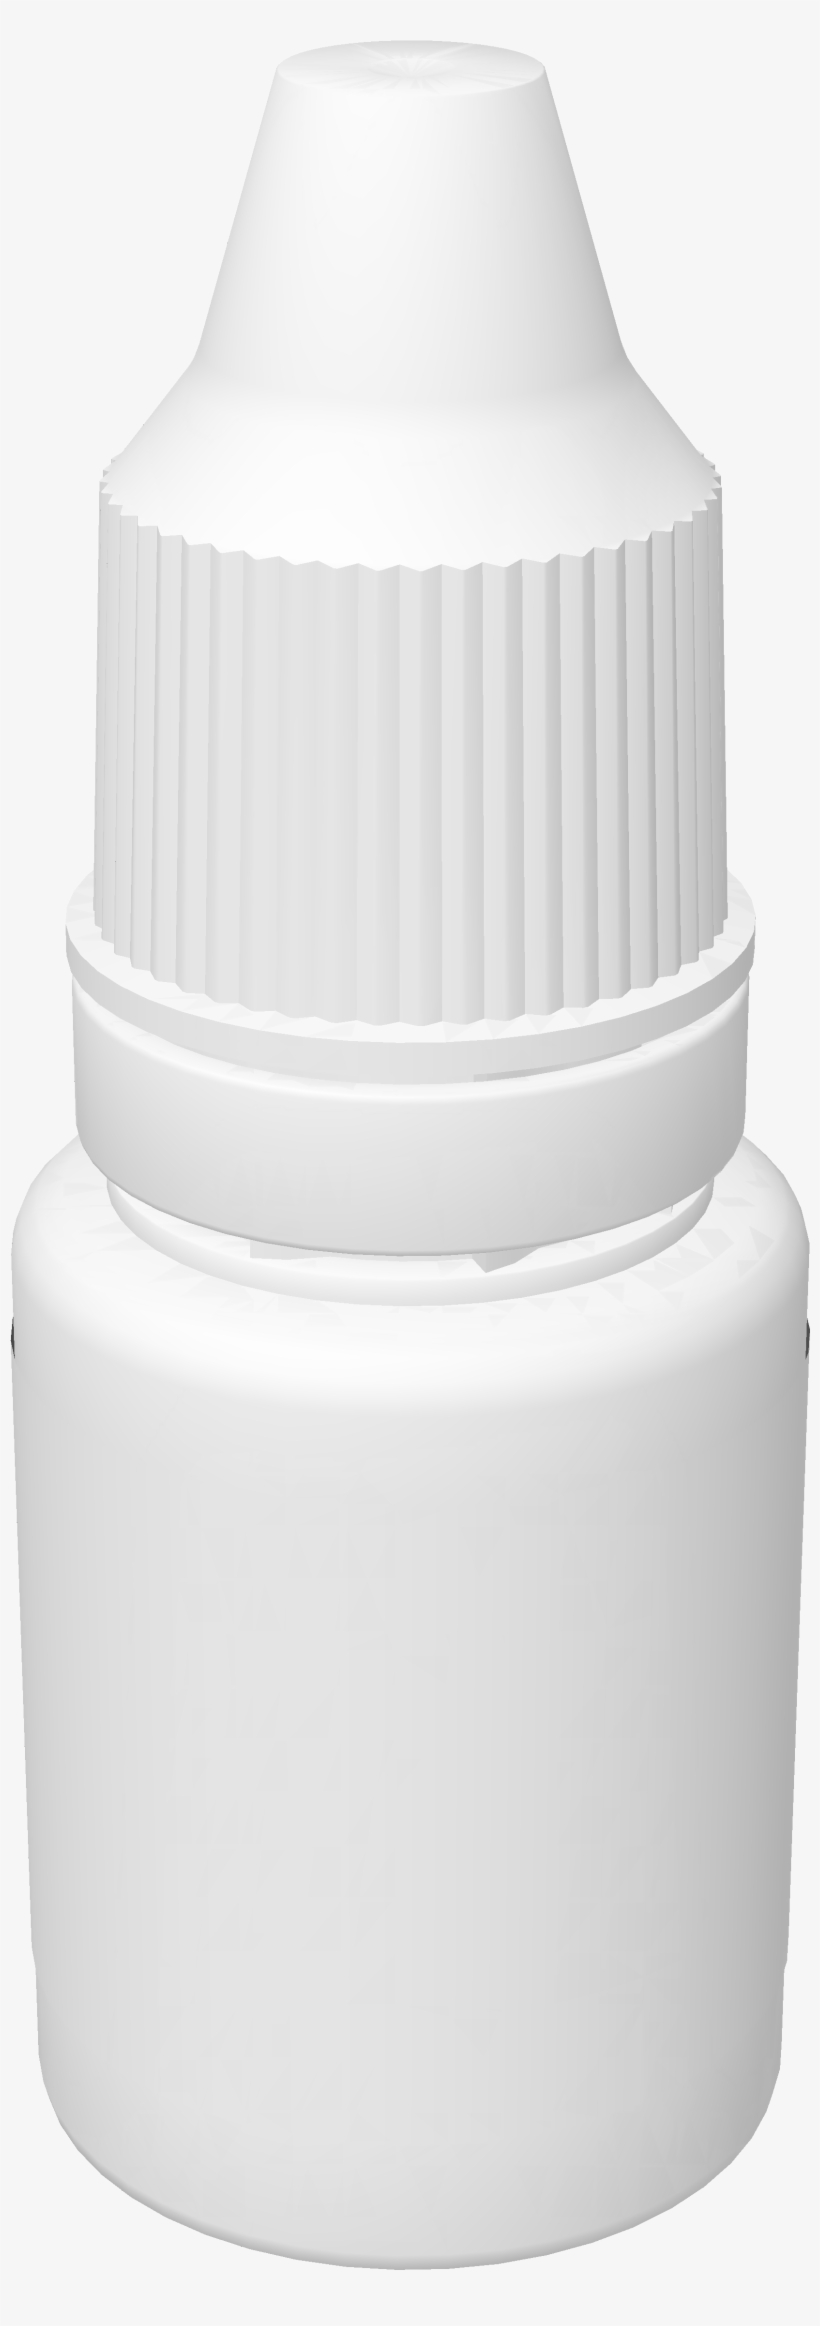 Eye Dropper Bottle - Waste Container, transparent png #4284637